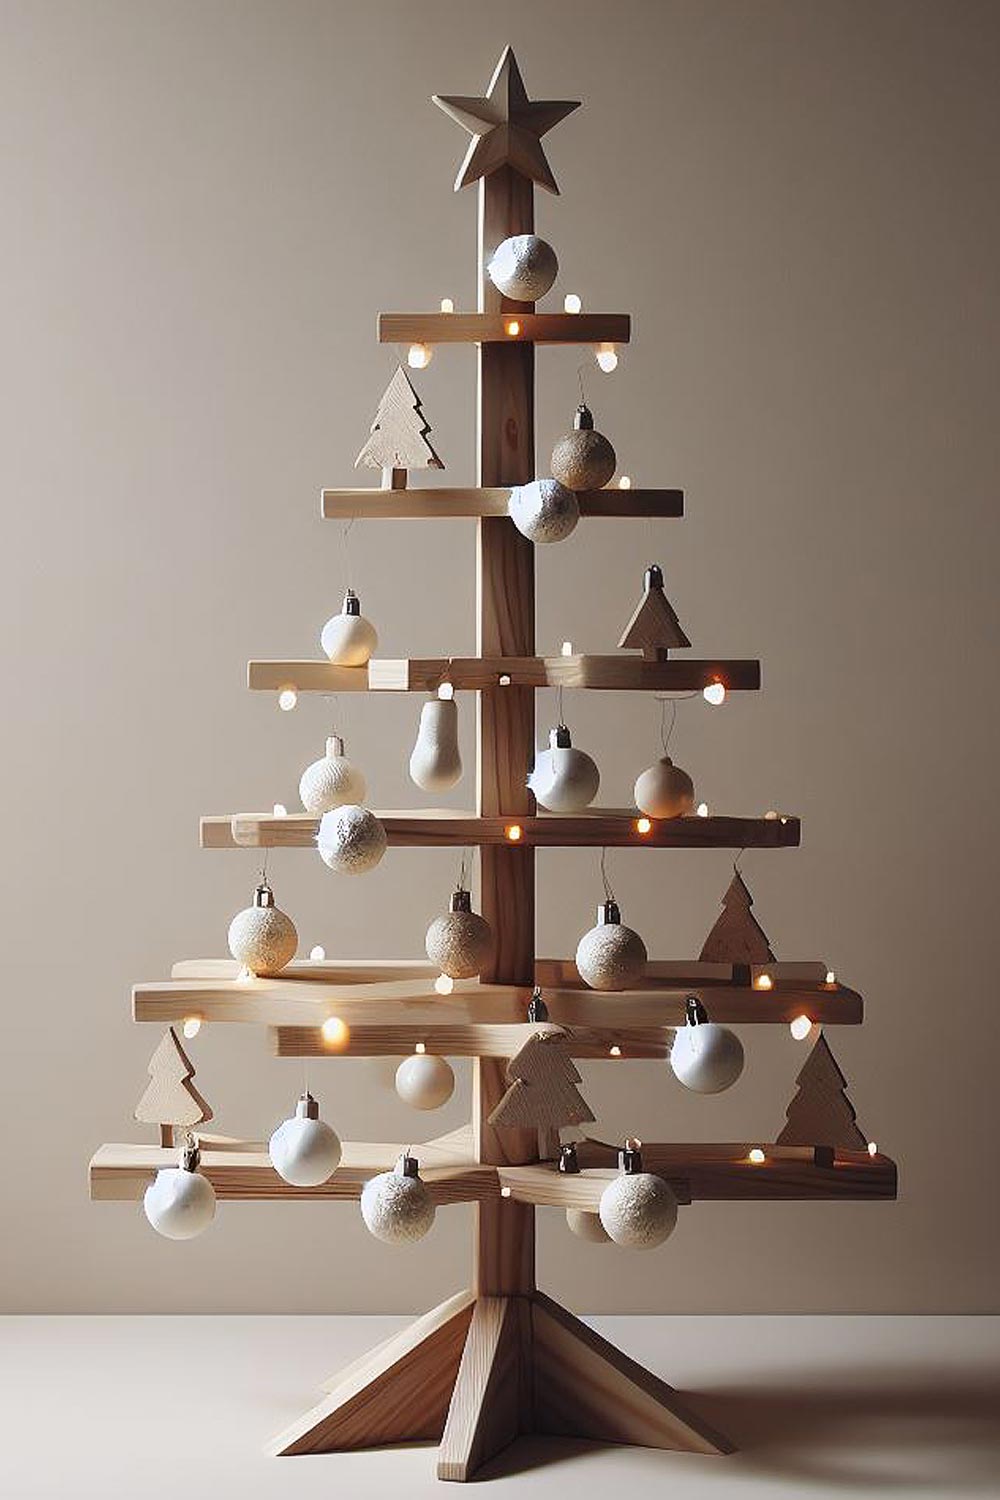 Wooden Christmas Tree with Decorations